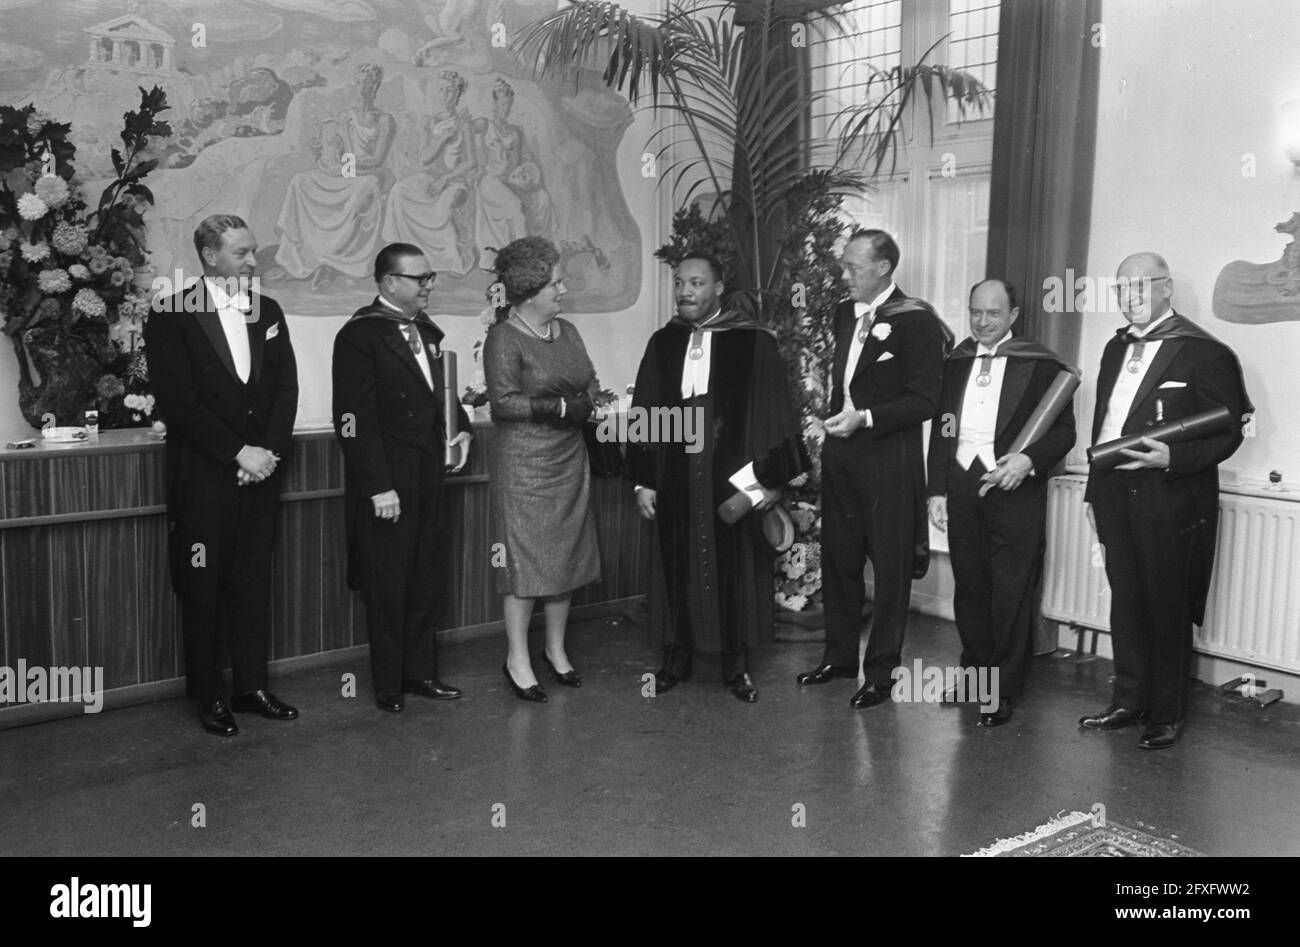 From left to right W. Gibson Parker (replacing Paul G. Hoffman), E. Jonckheer, Queen Juliana, Dr. Martin Luther King, Prince Bernhard, Prof. Jacques Ellul and C. Rijnsdorp, October 20, 1965, honorary doctorates, professors, ceremonies, princes, The Netherlands, 20th century press agency photo, news to remember, documentary, historic photography 1945-1990, visual stories, human history of the Twentieth Century, capturing moments in time Stock Photo